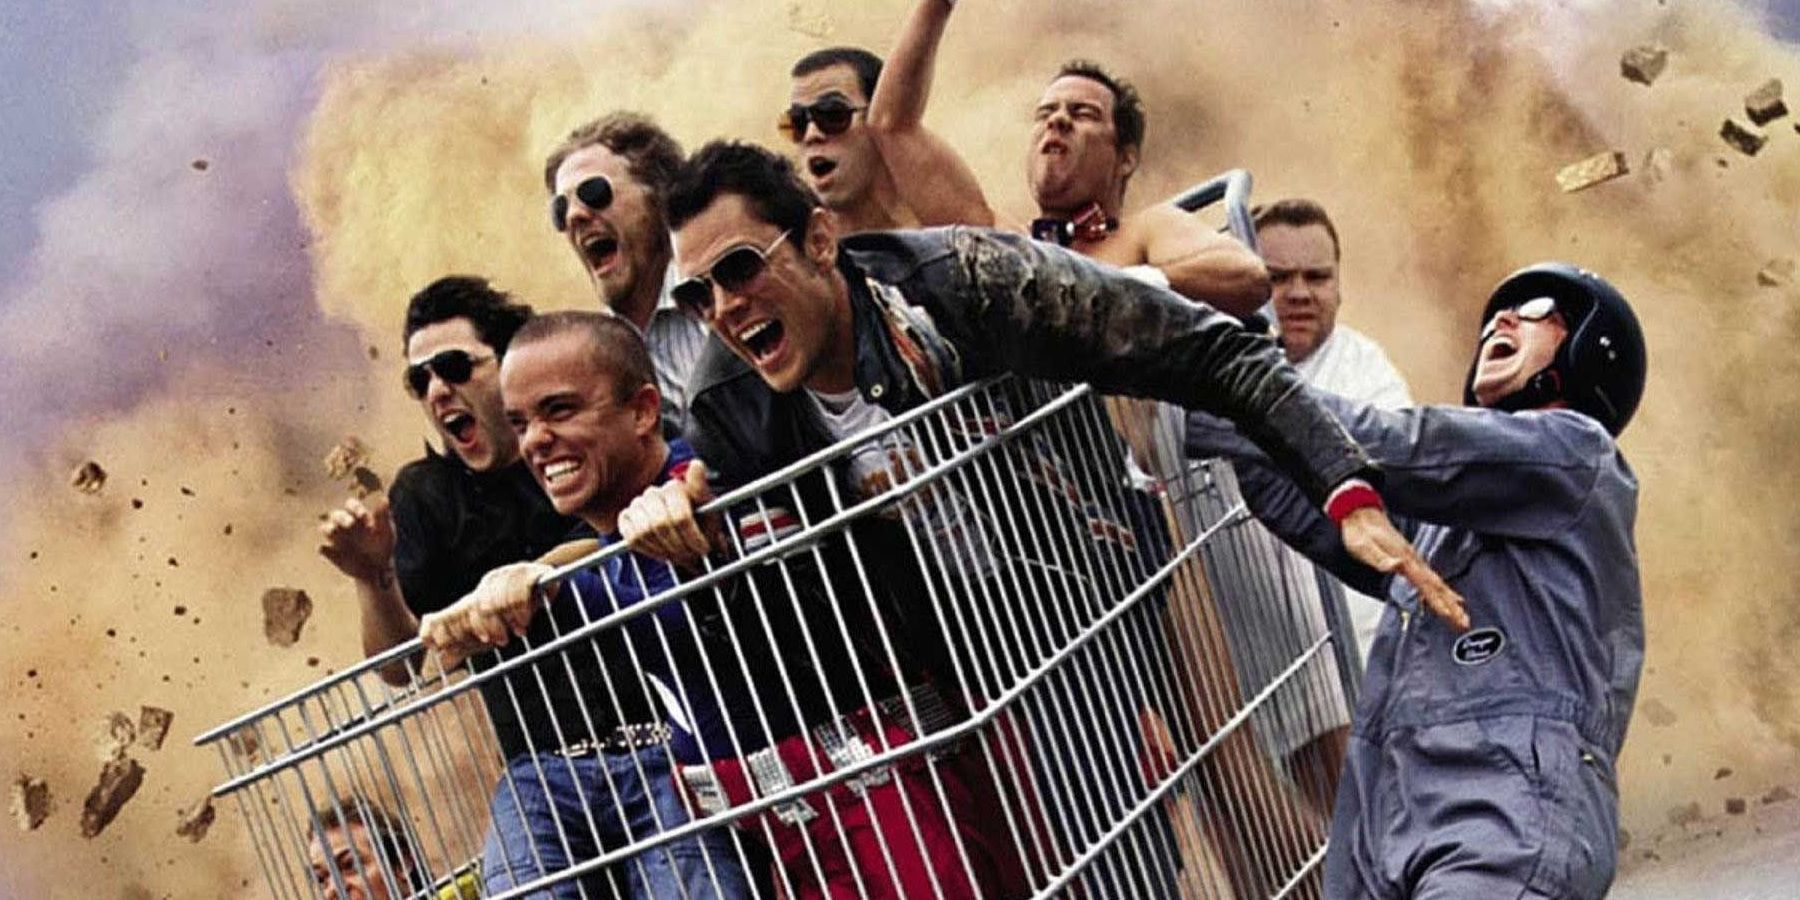 Characters in the poster for Jackass